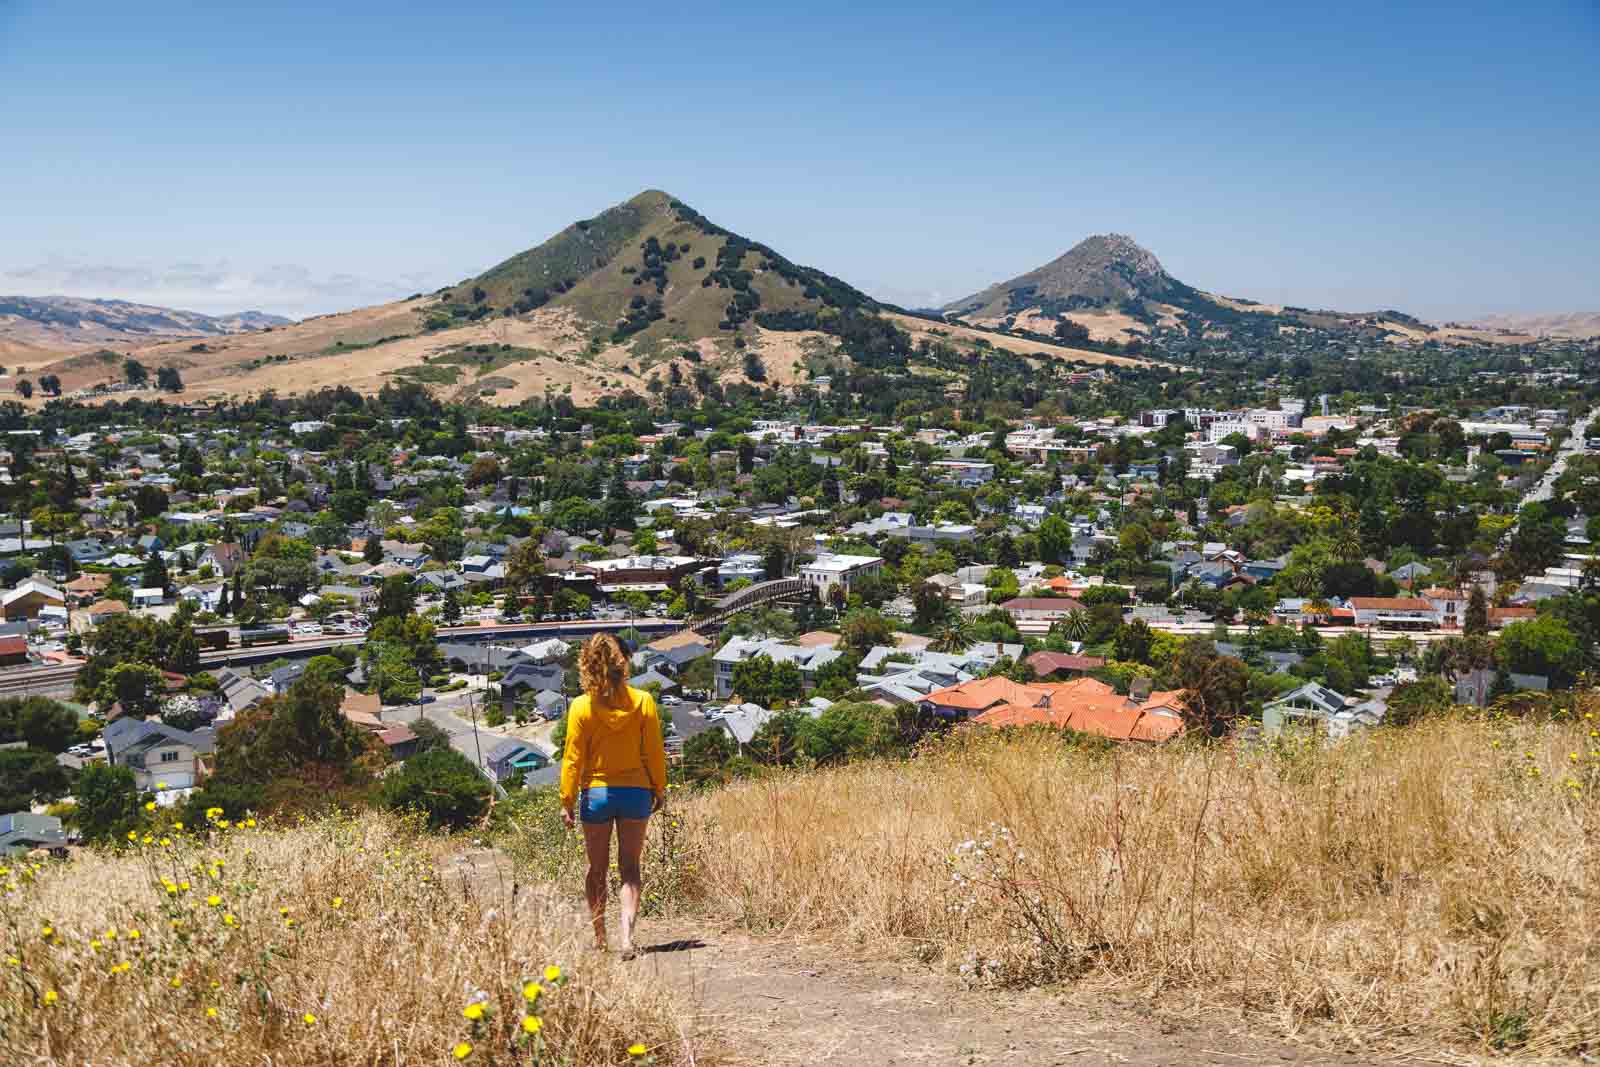 Nina hiking along a trail in the Terrace Hill Open Space with a view over San Luis Obispo town and beyond.